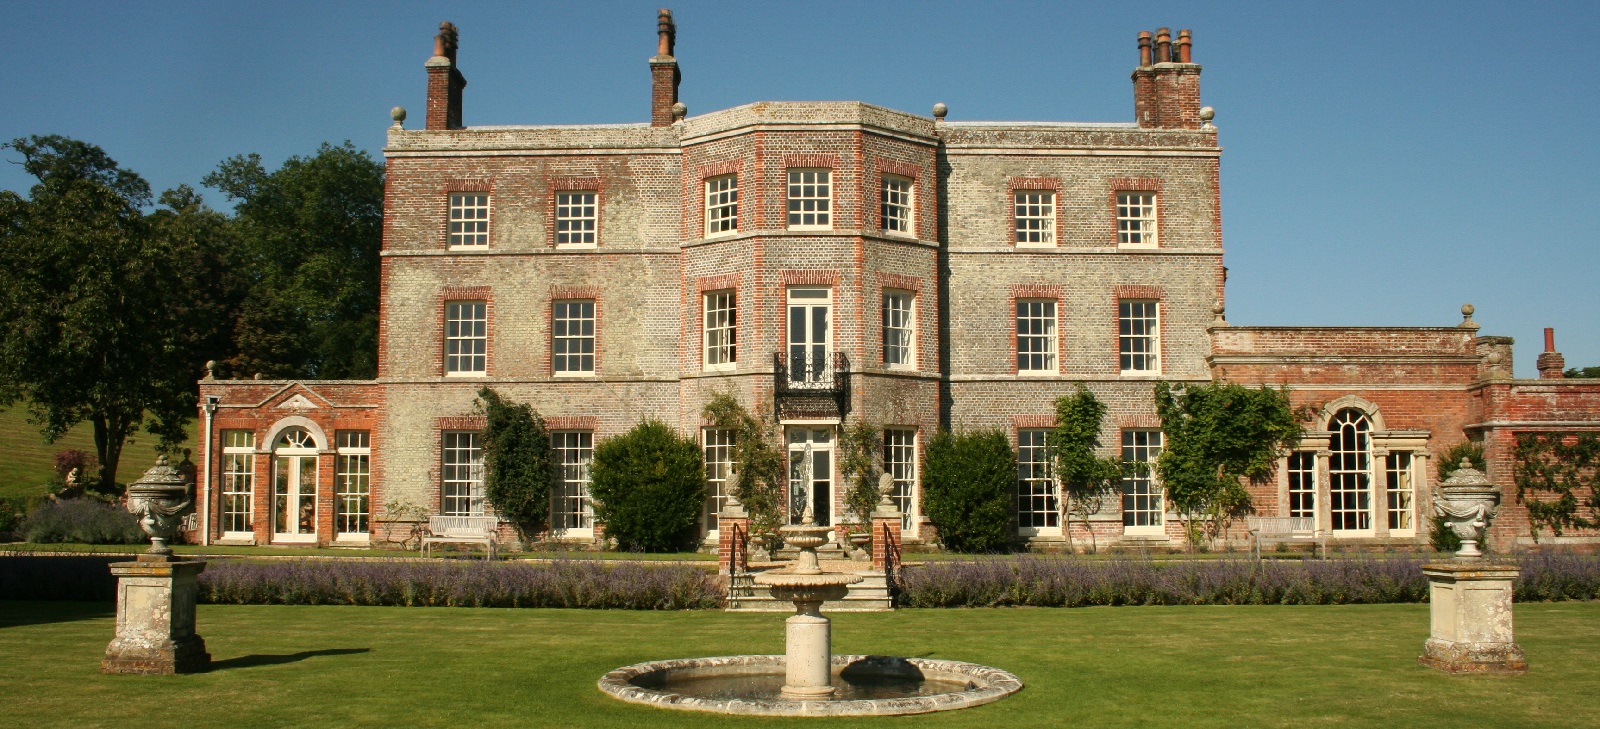 Nunwell House and Gardens, Brading, Isle of Wight